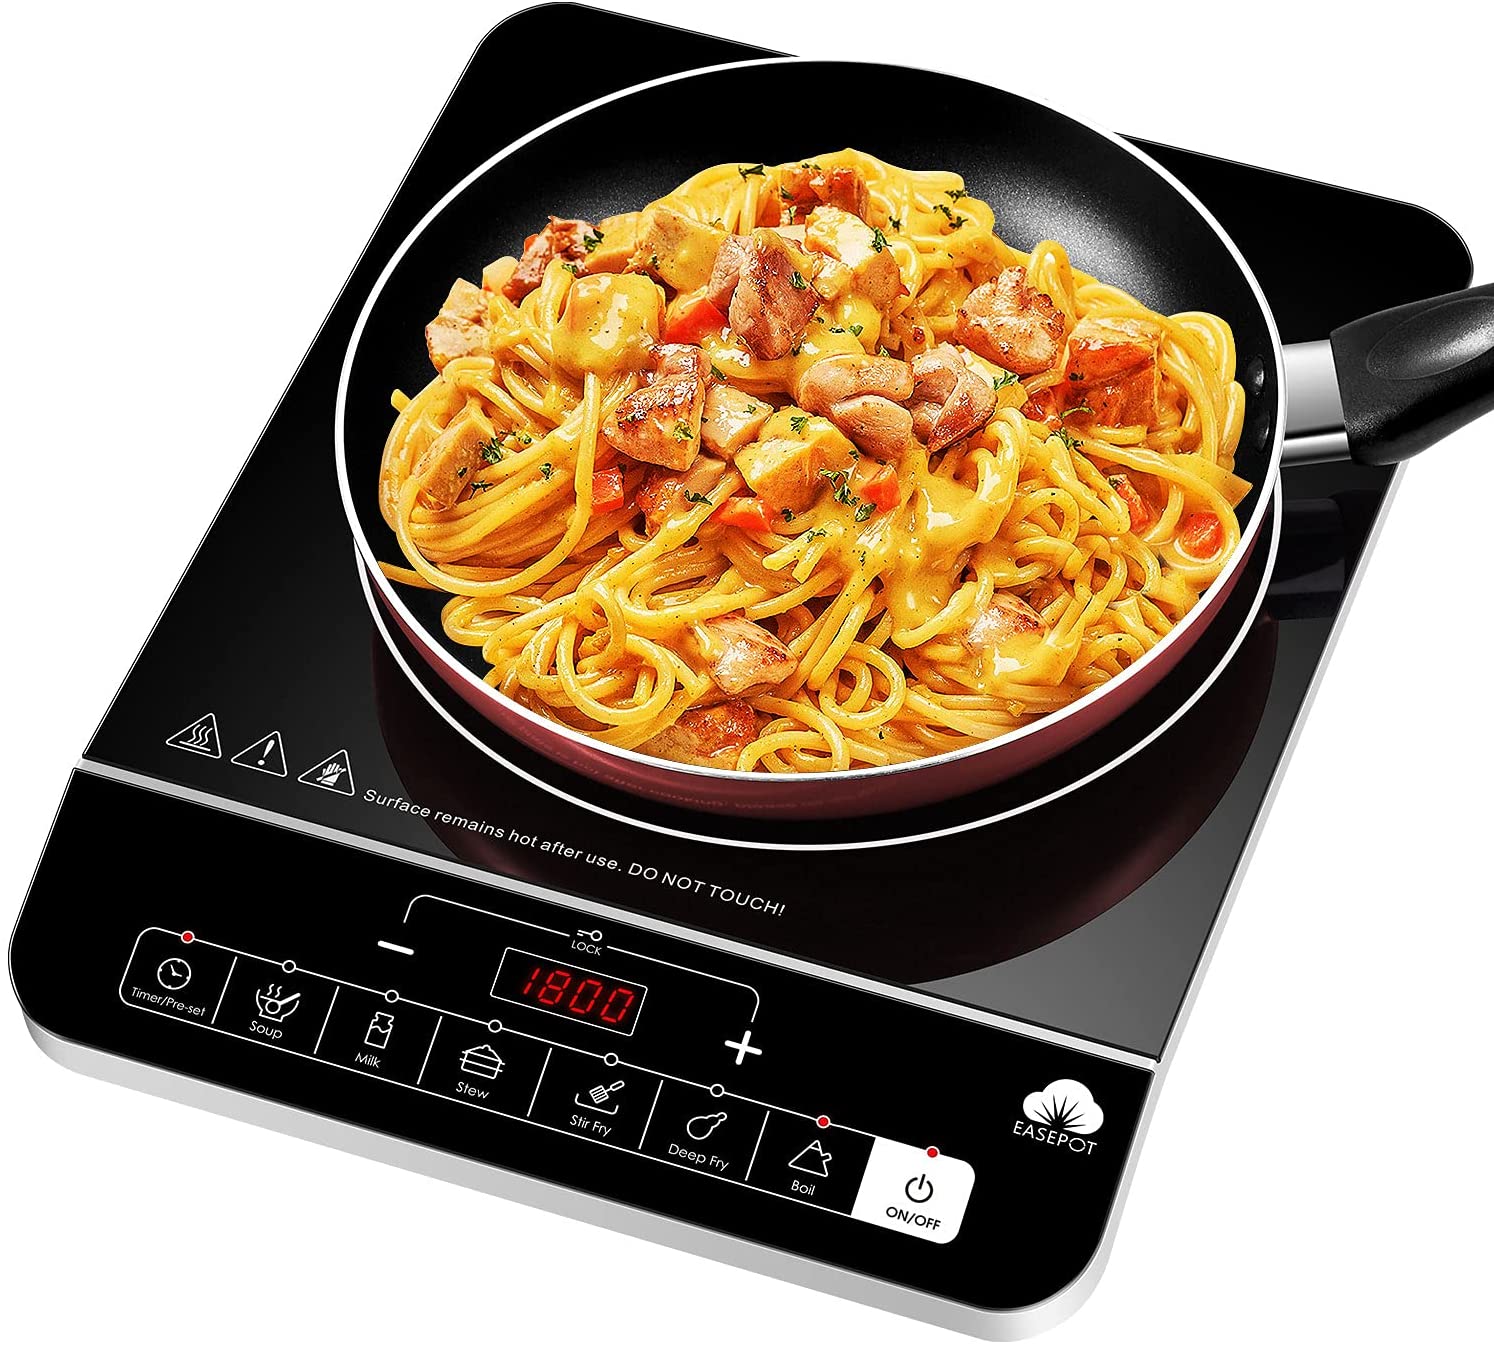 Portable Induction Cooktop Easepot Countertop Induction Burner Electric